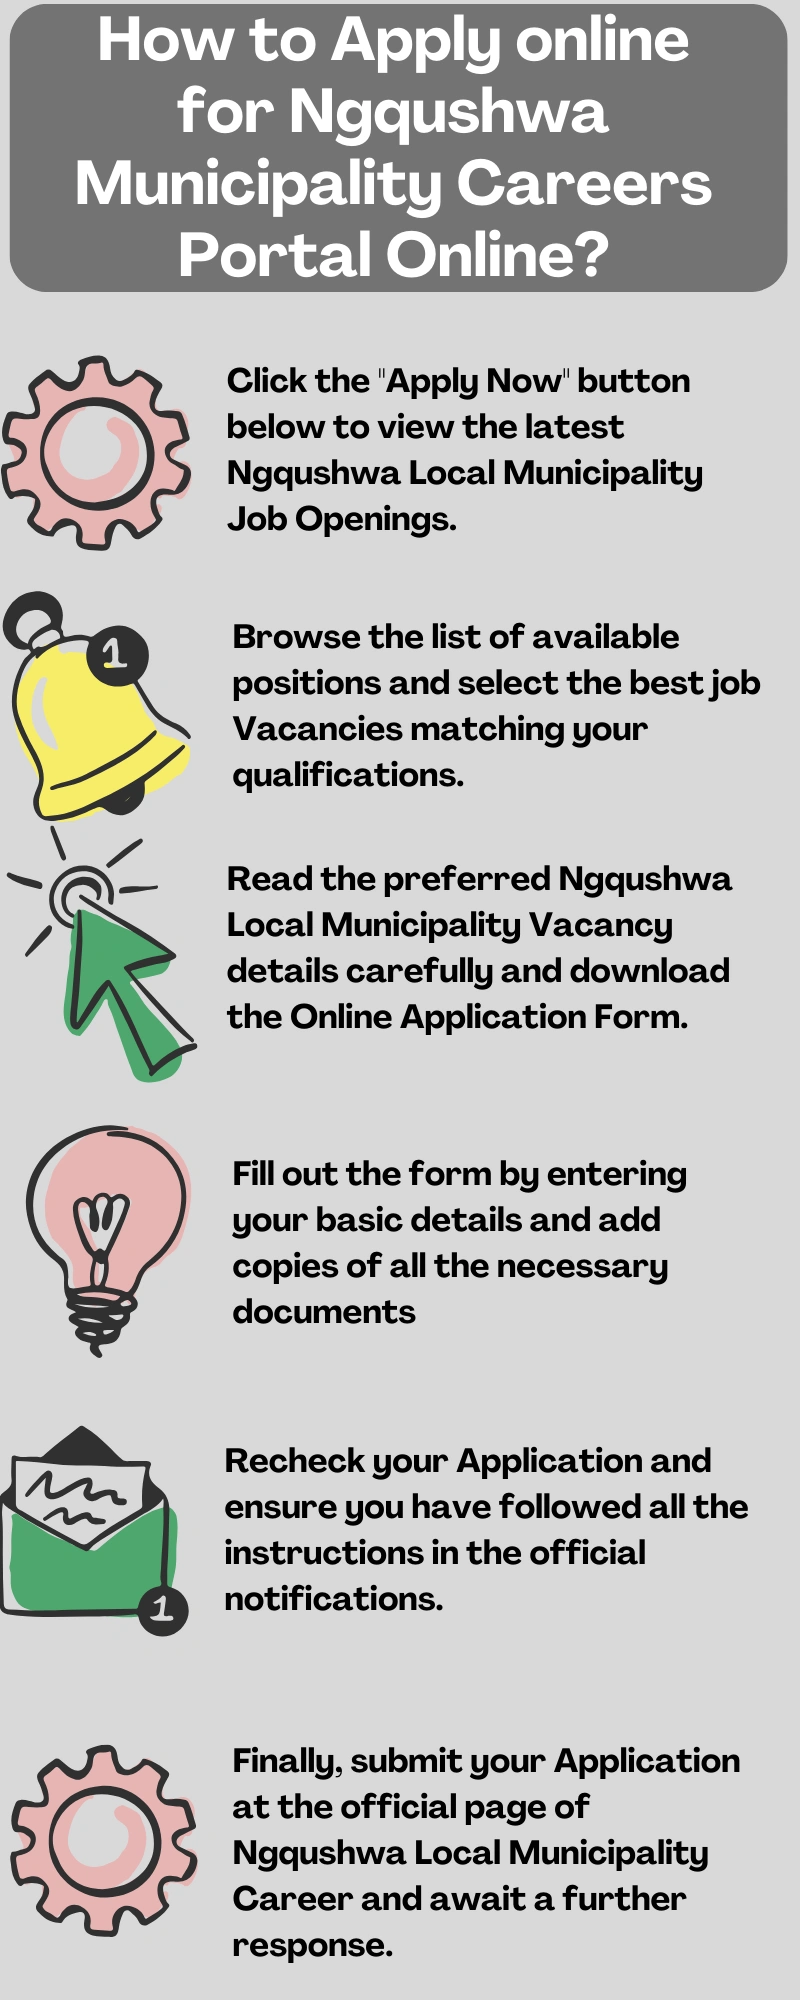 How to Apply online for Ngqushwa Municipality Careers Portal Online?